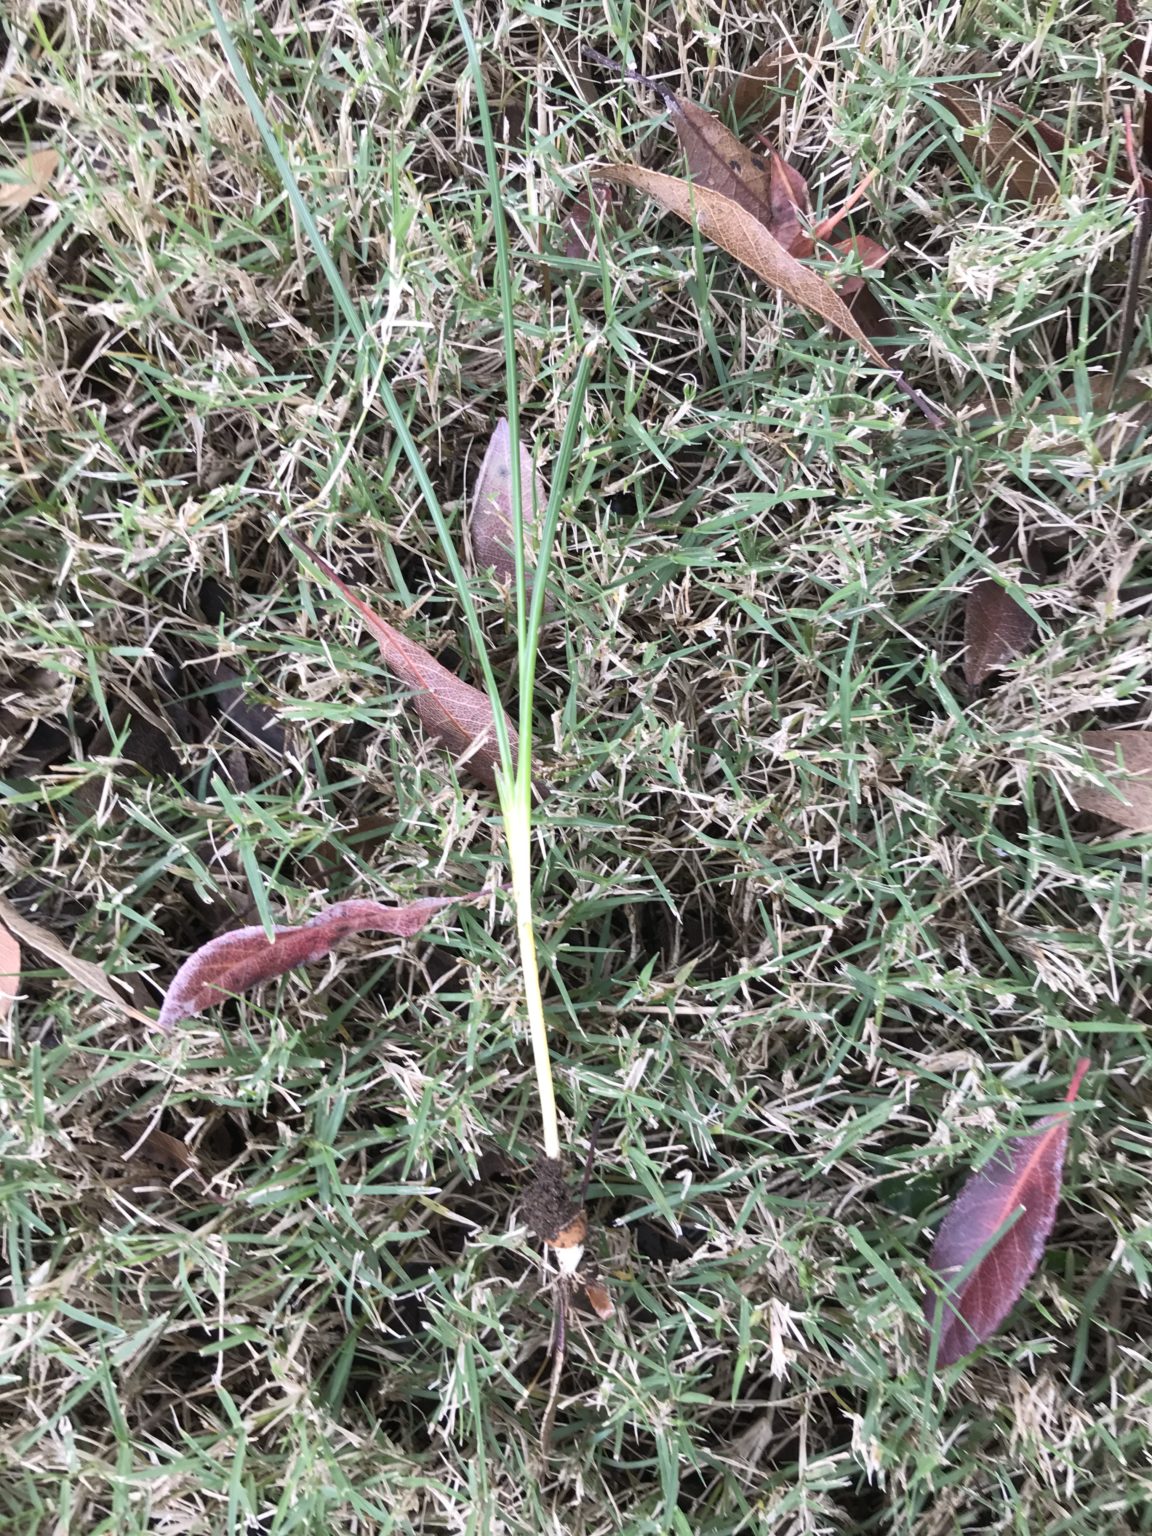 How To Get Rid Of Onion Grass In My Lawn - Lawn Green